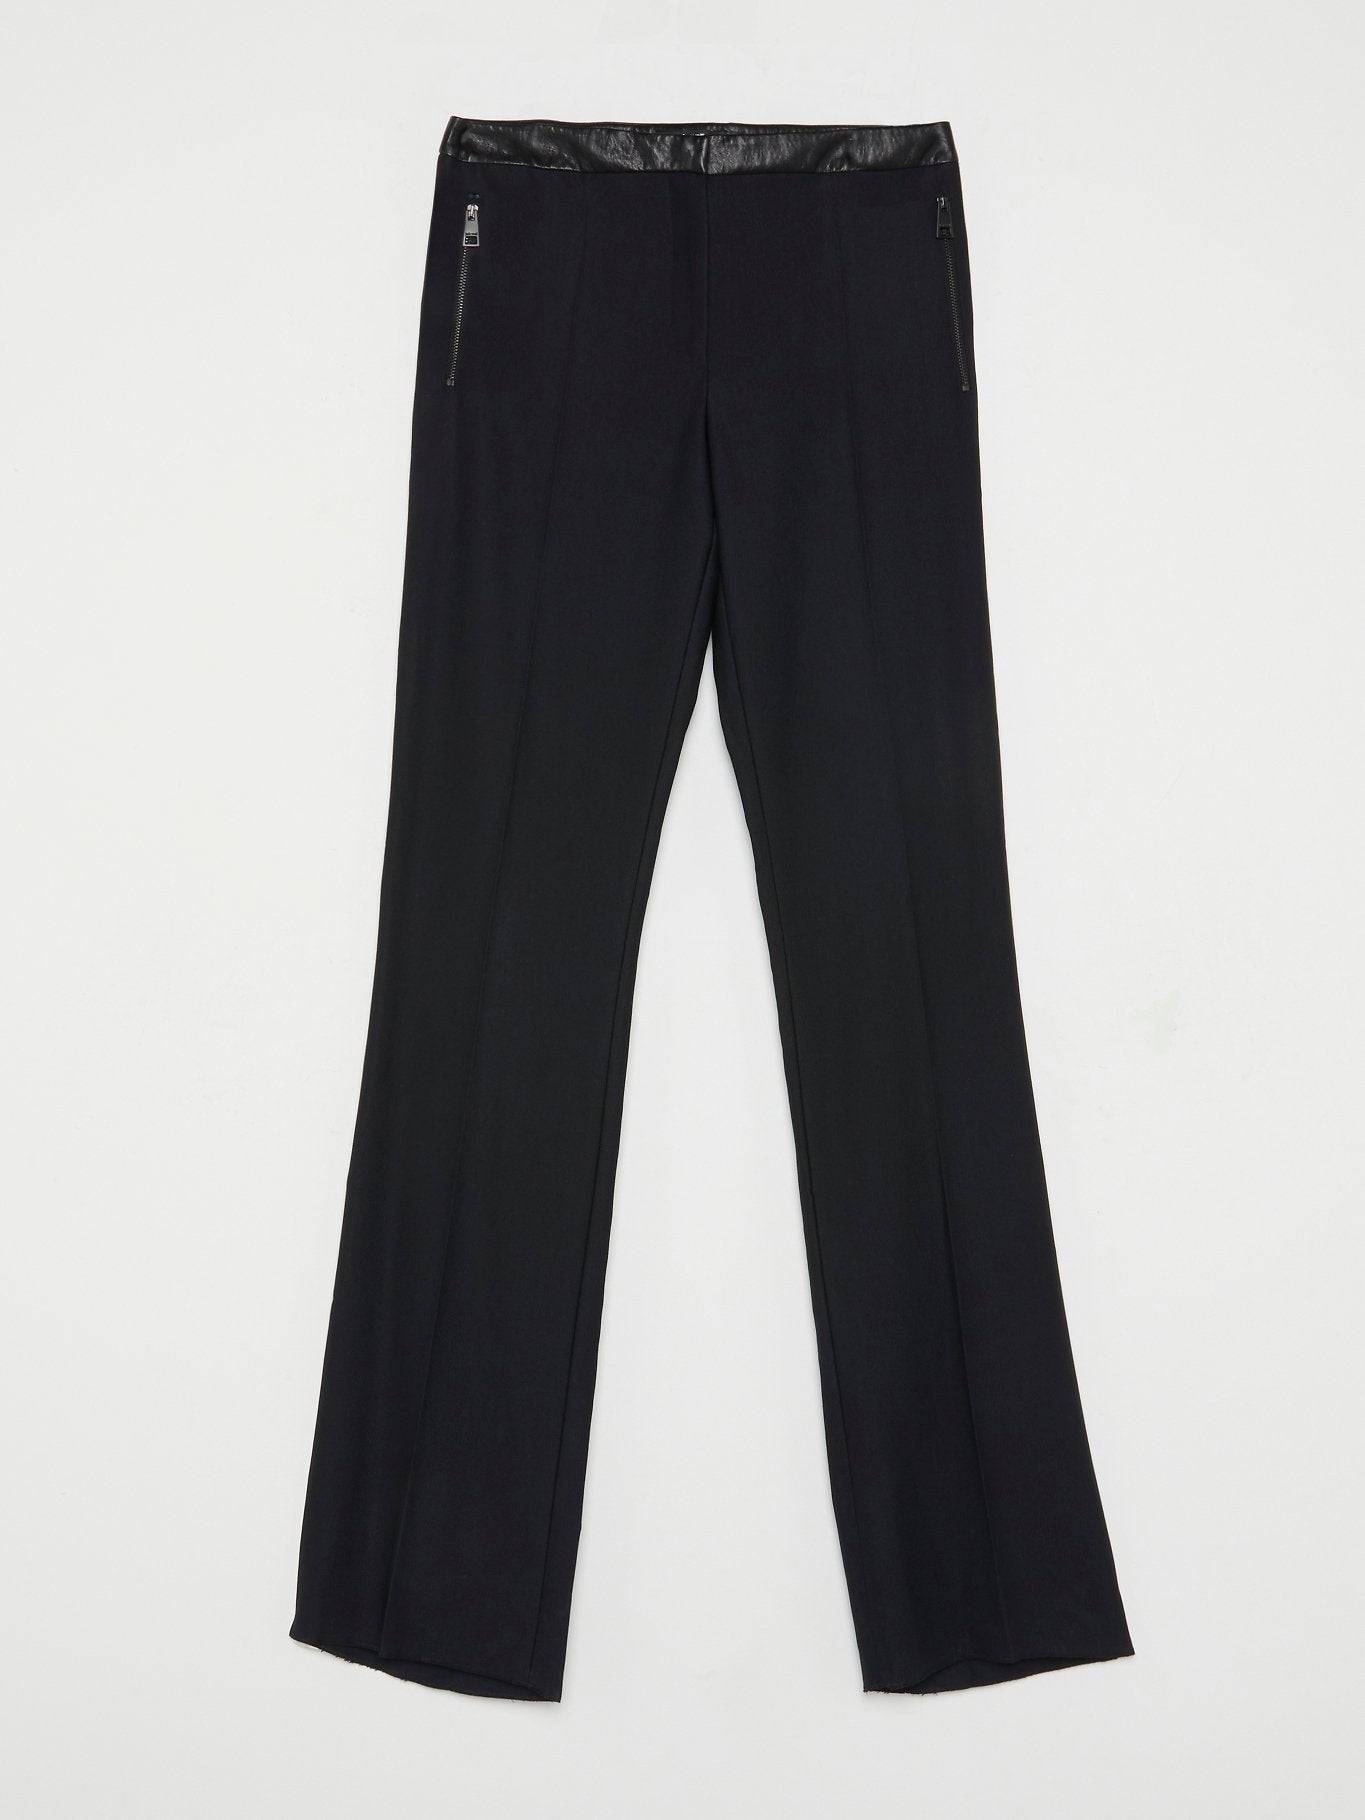 Black Leather Waistband Trousers